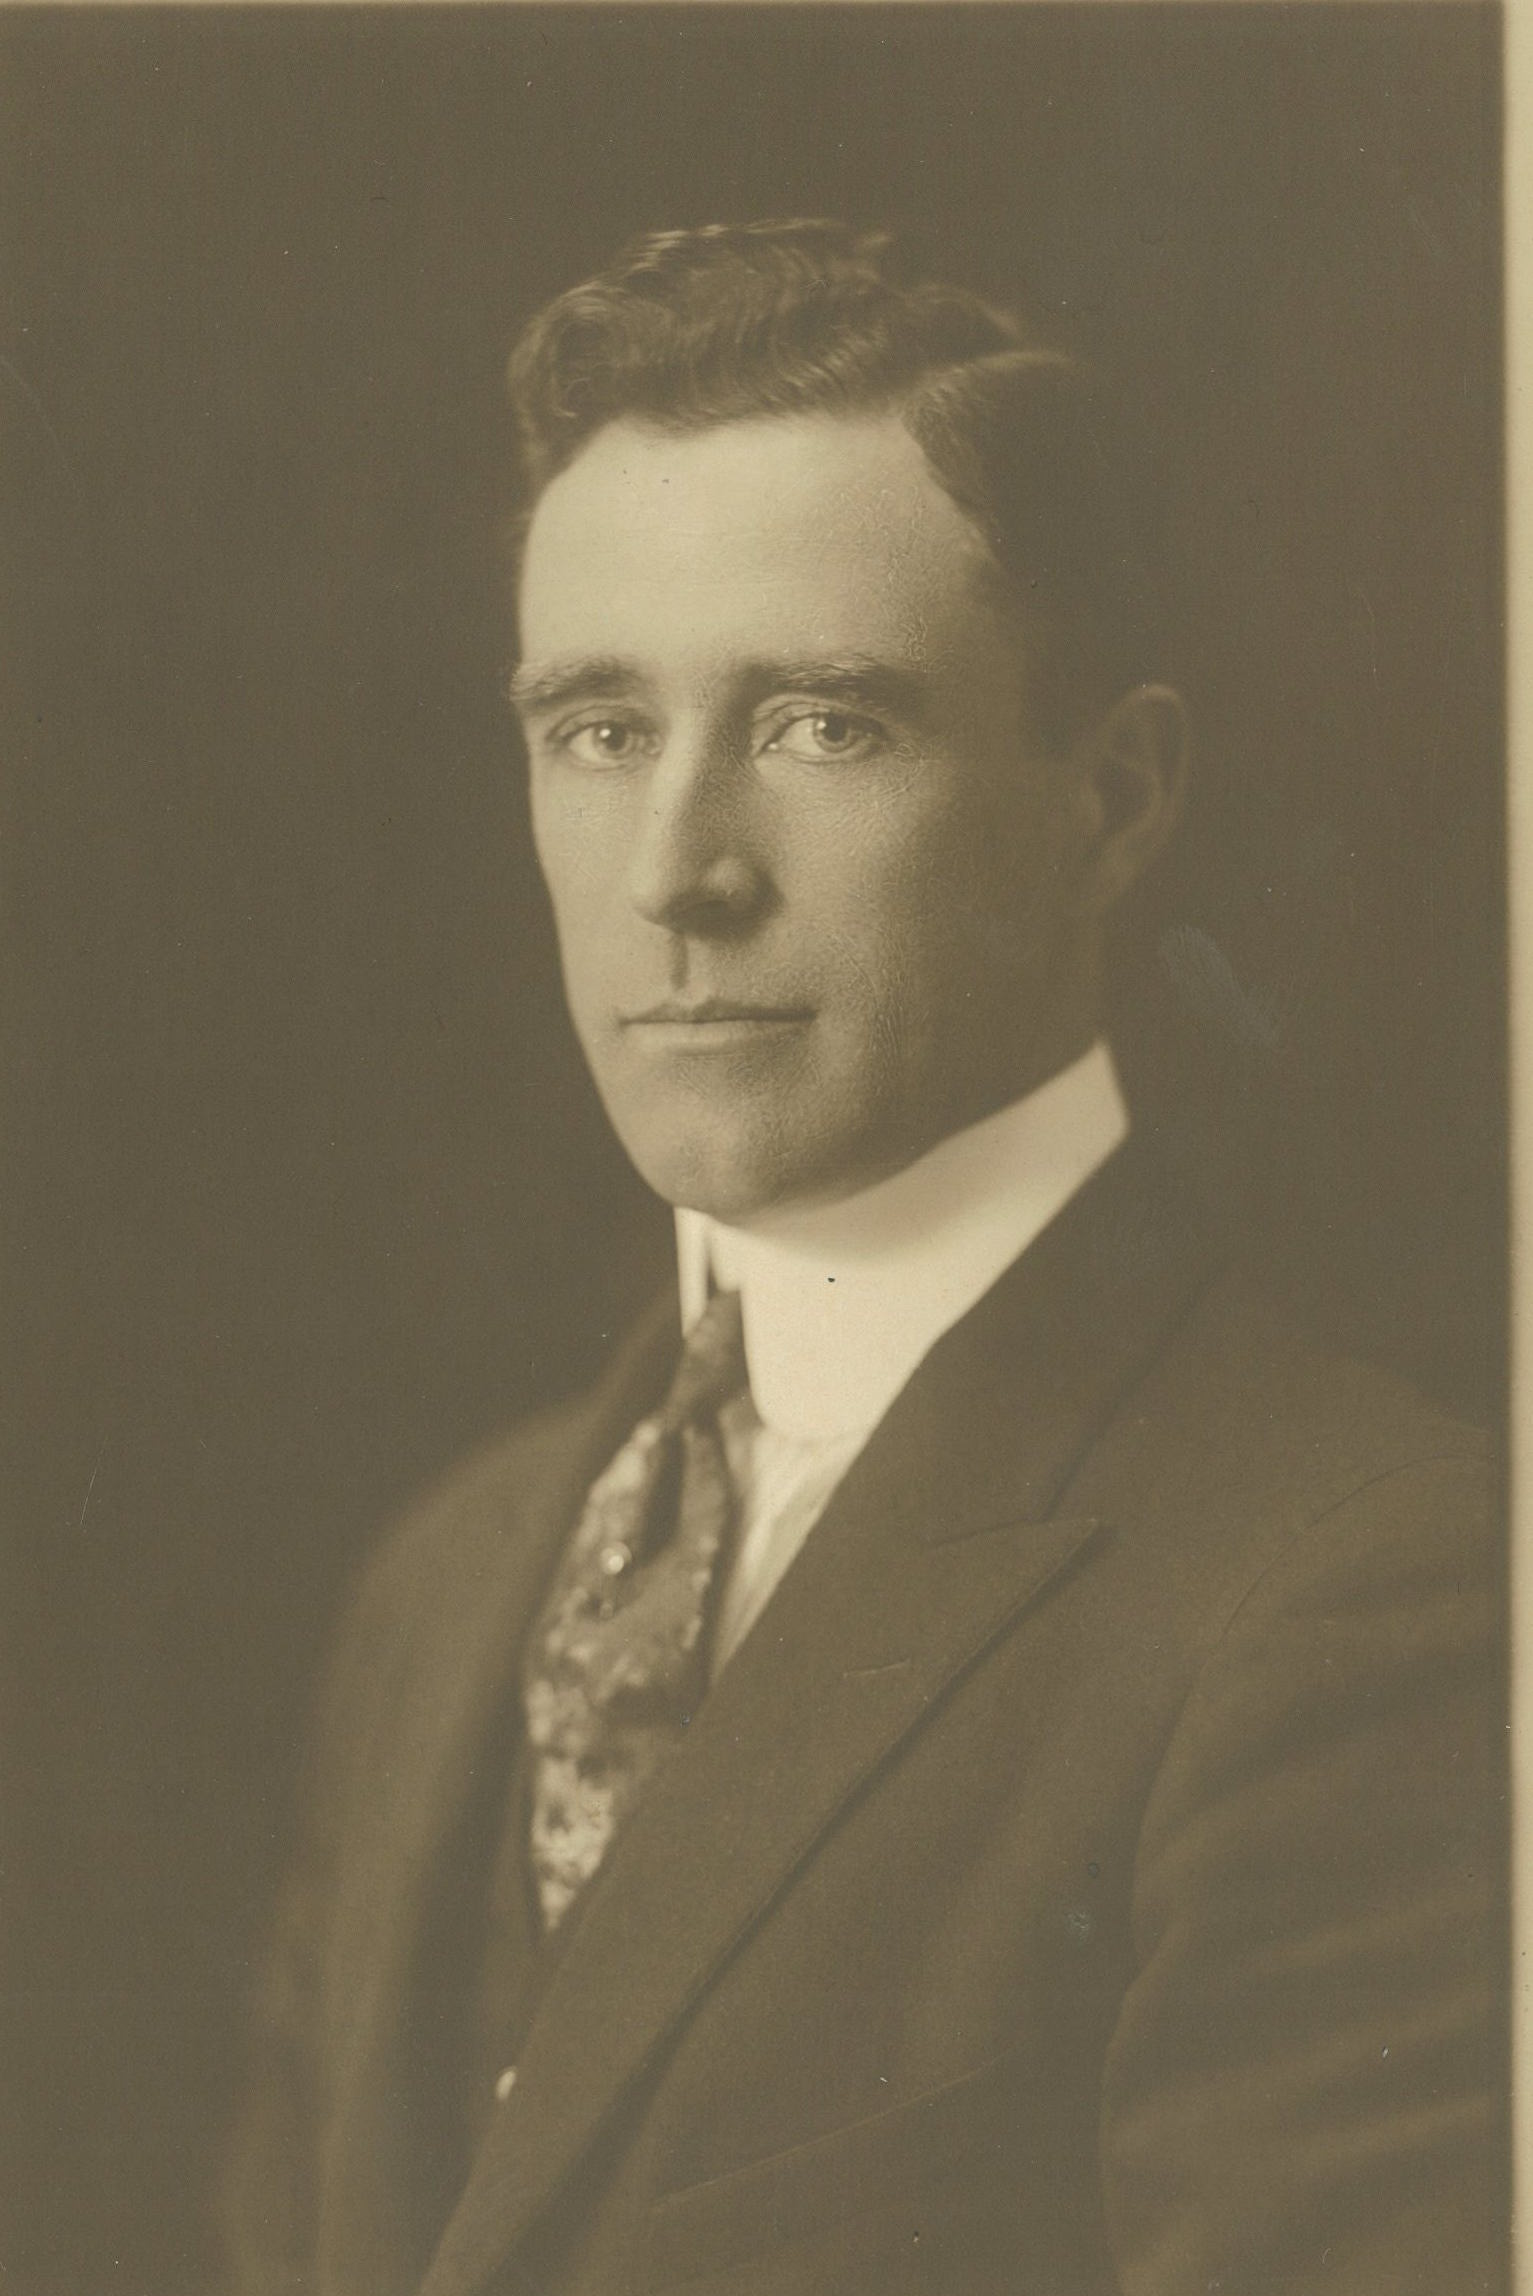 Black and white headshot of a man in a suit, James Edward Sheehan